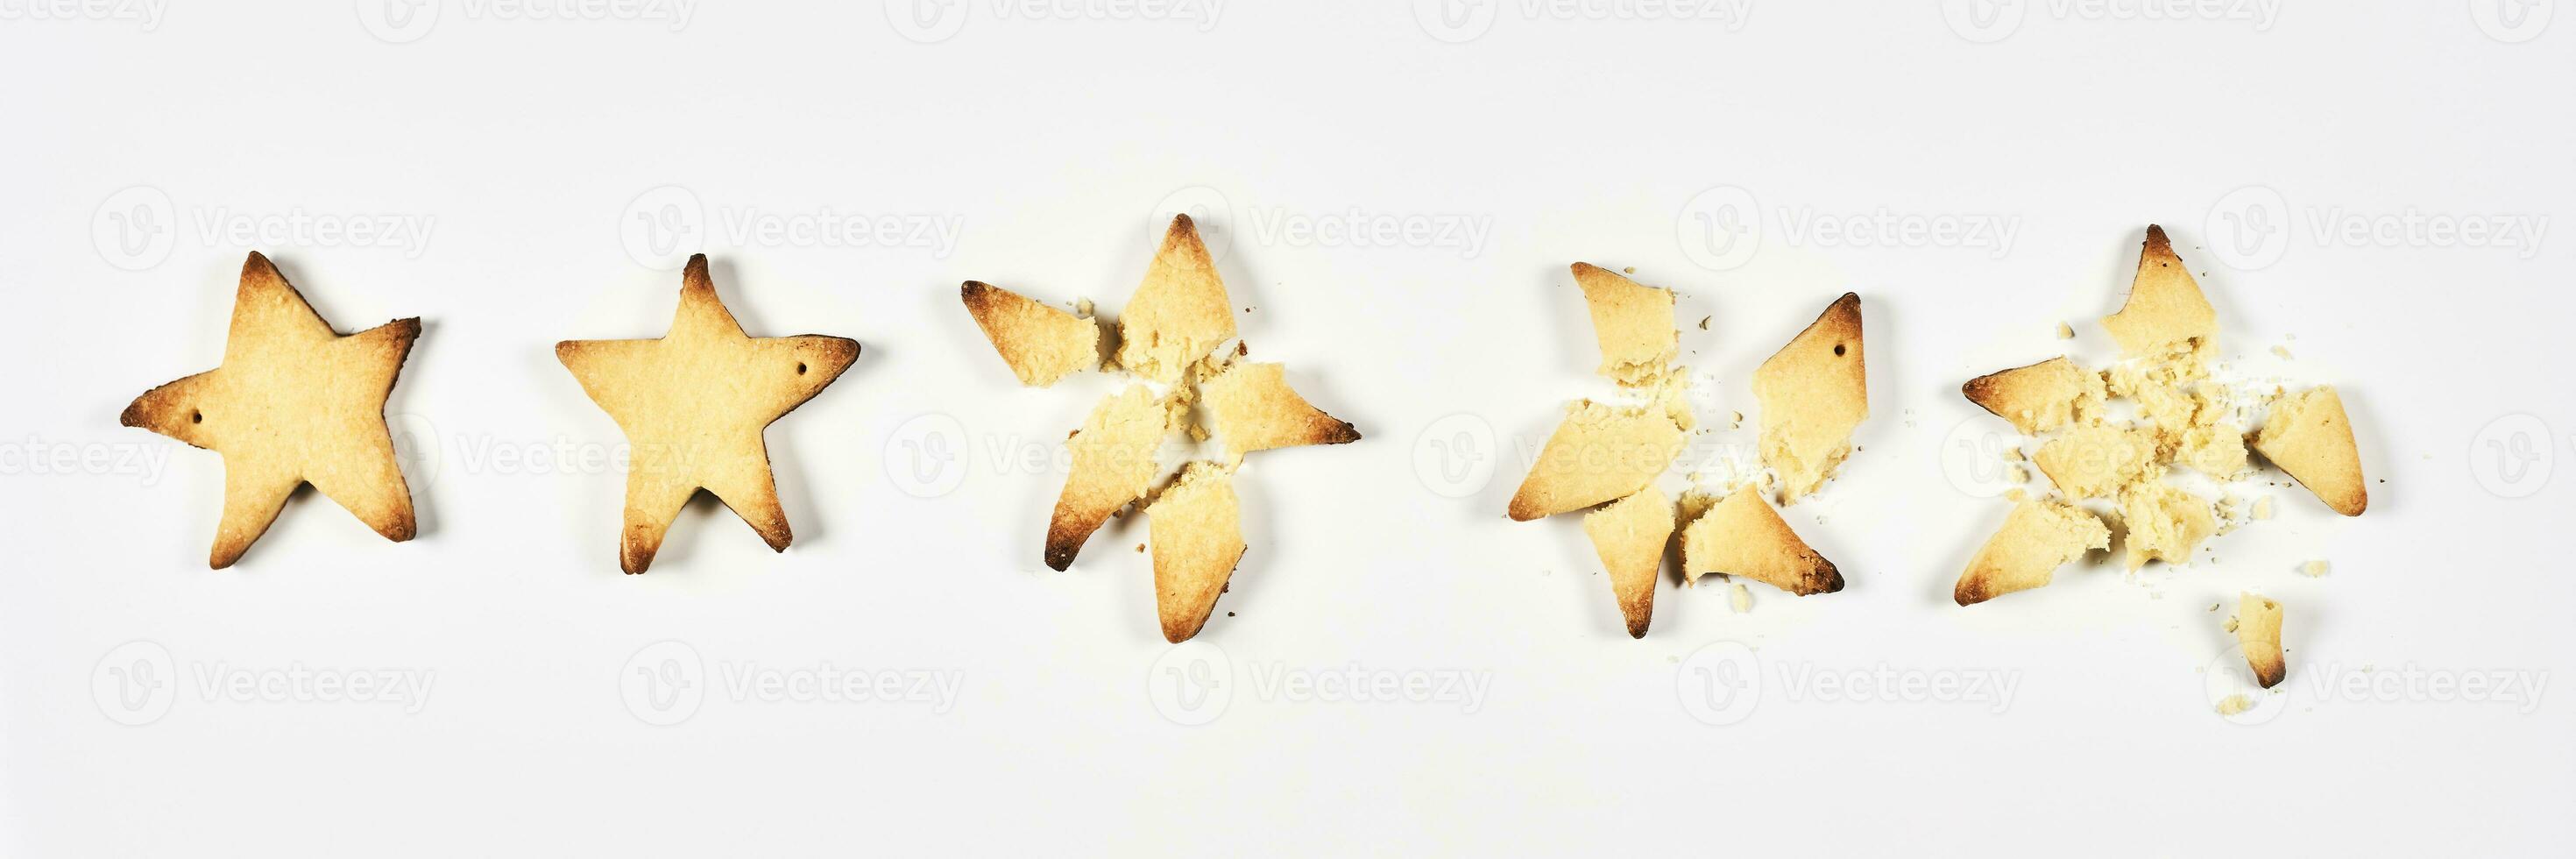 Two stars ranking. 2 baked star shape cookies photo